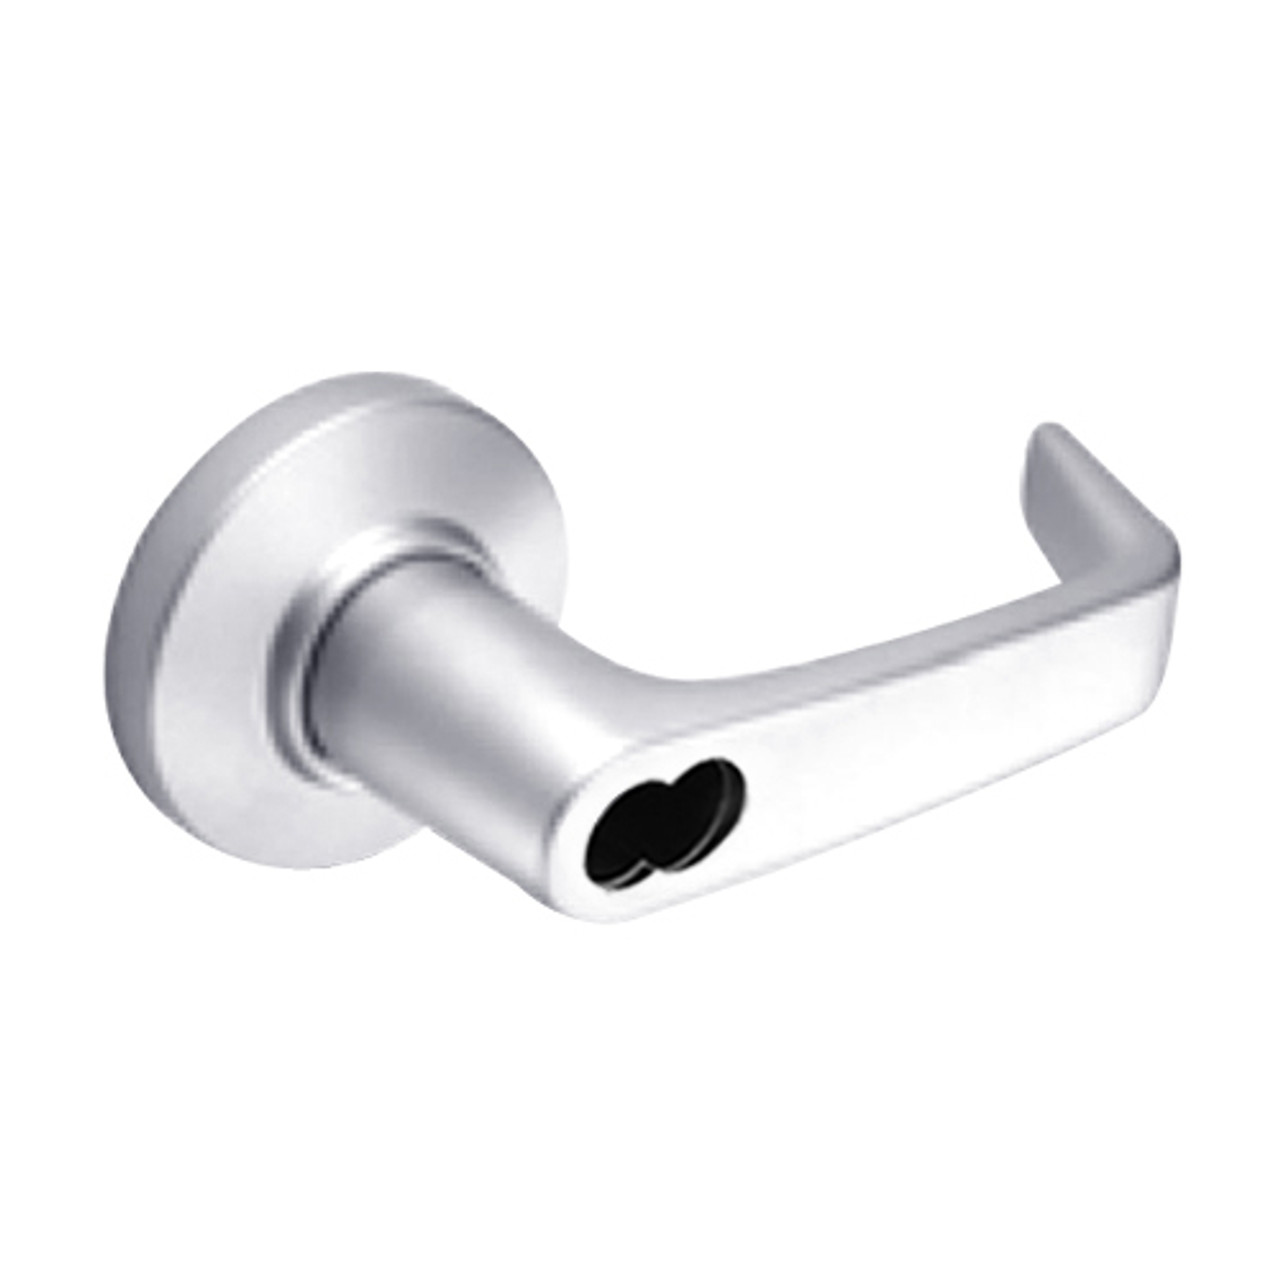 9K37RD15CS3625 Best 9K Series Special Function Cylindrical Lever Locks with Contour Angle with Return Lever Design Accept 7 Pin Best Core in Bright Chrome